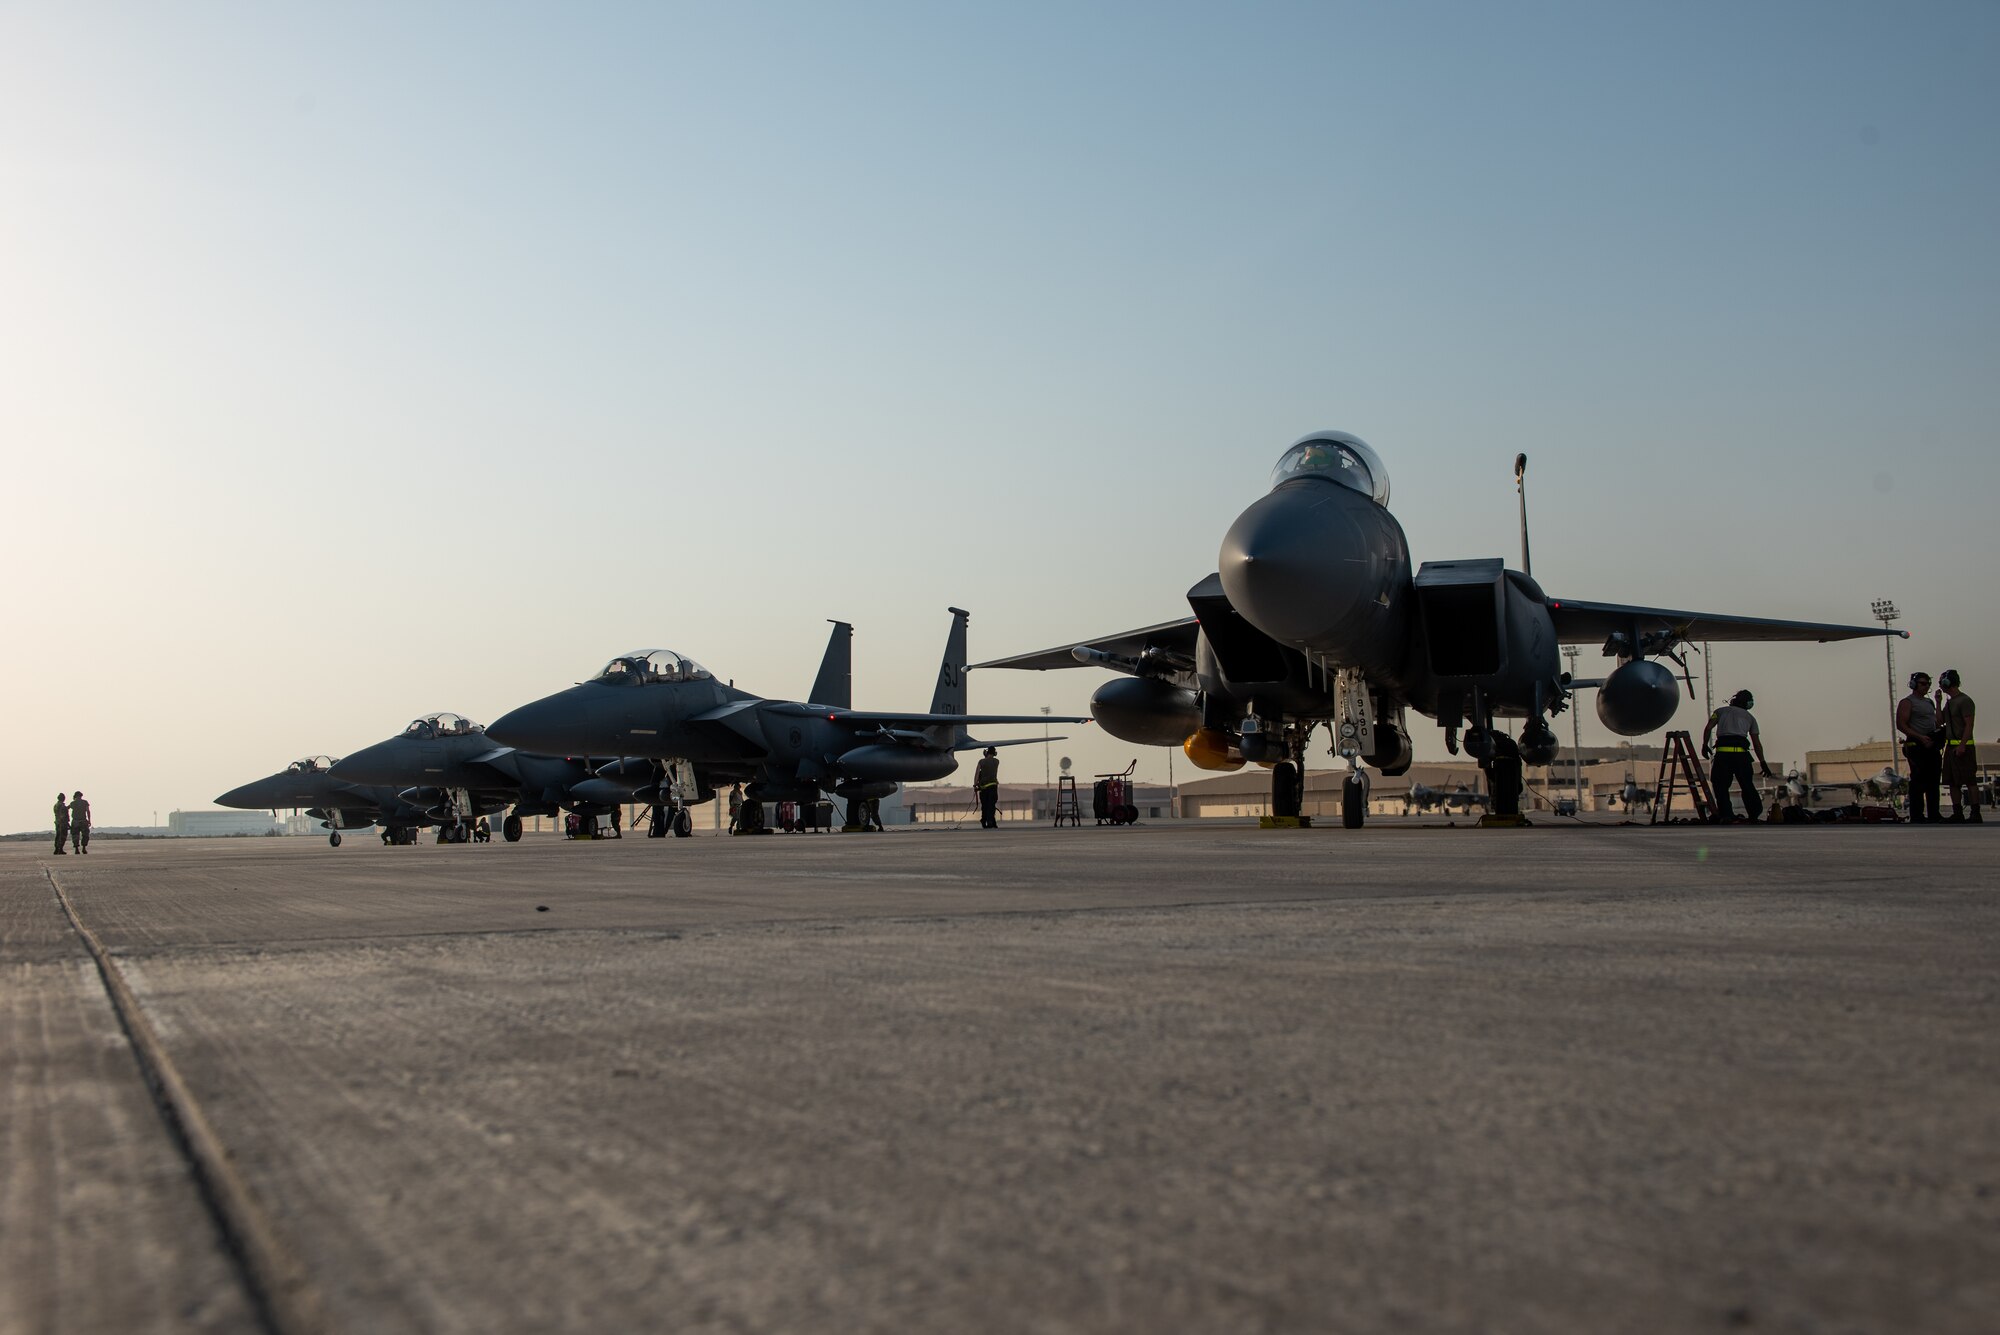 Four F-15E Strike Eagles from the 4th Fighter Wing, Seymour Johnson Air Force Base, North Carolina, park at Al Dhafra Air Base, United Arab Emirates, June 13, 2019. The F-15Es joined ADABs inventory of other fighters to include F-15C Eagles and F-35A Lightning IIs. (U.S. Air Force photo by Staff Sgt. Chris Thornbury)